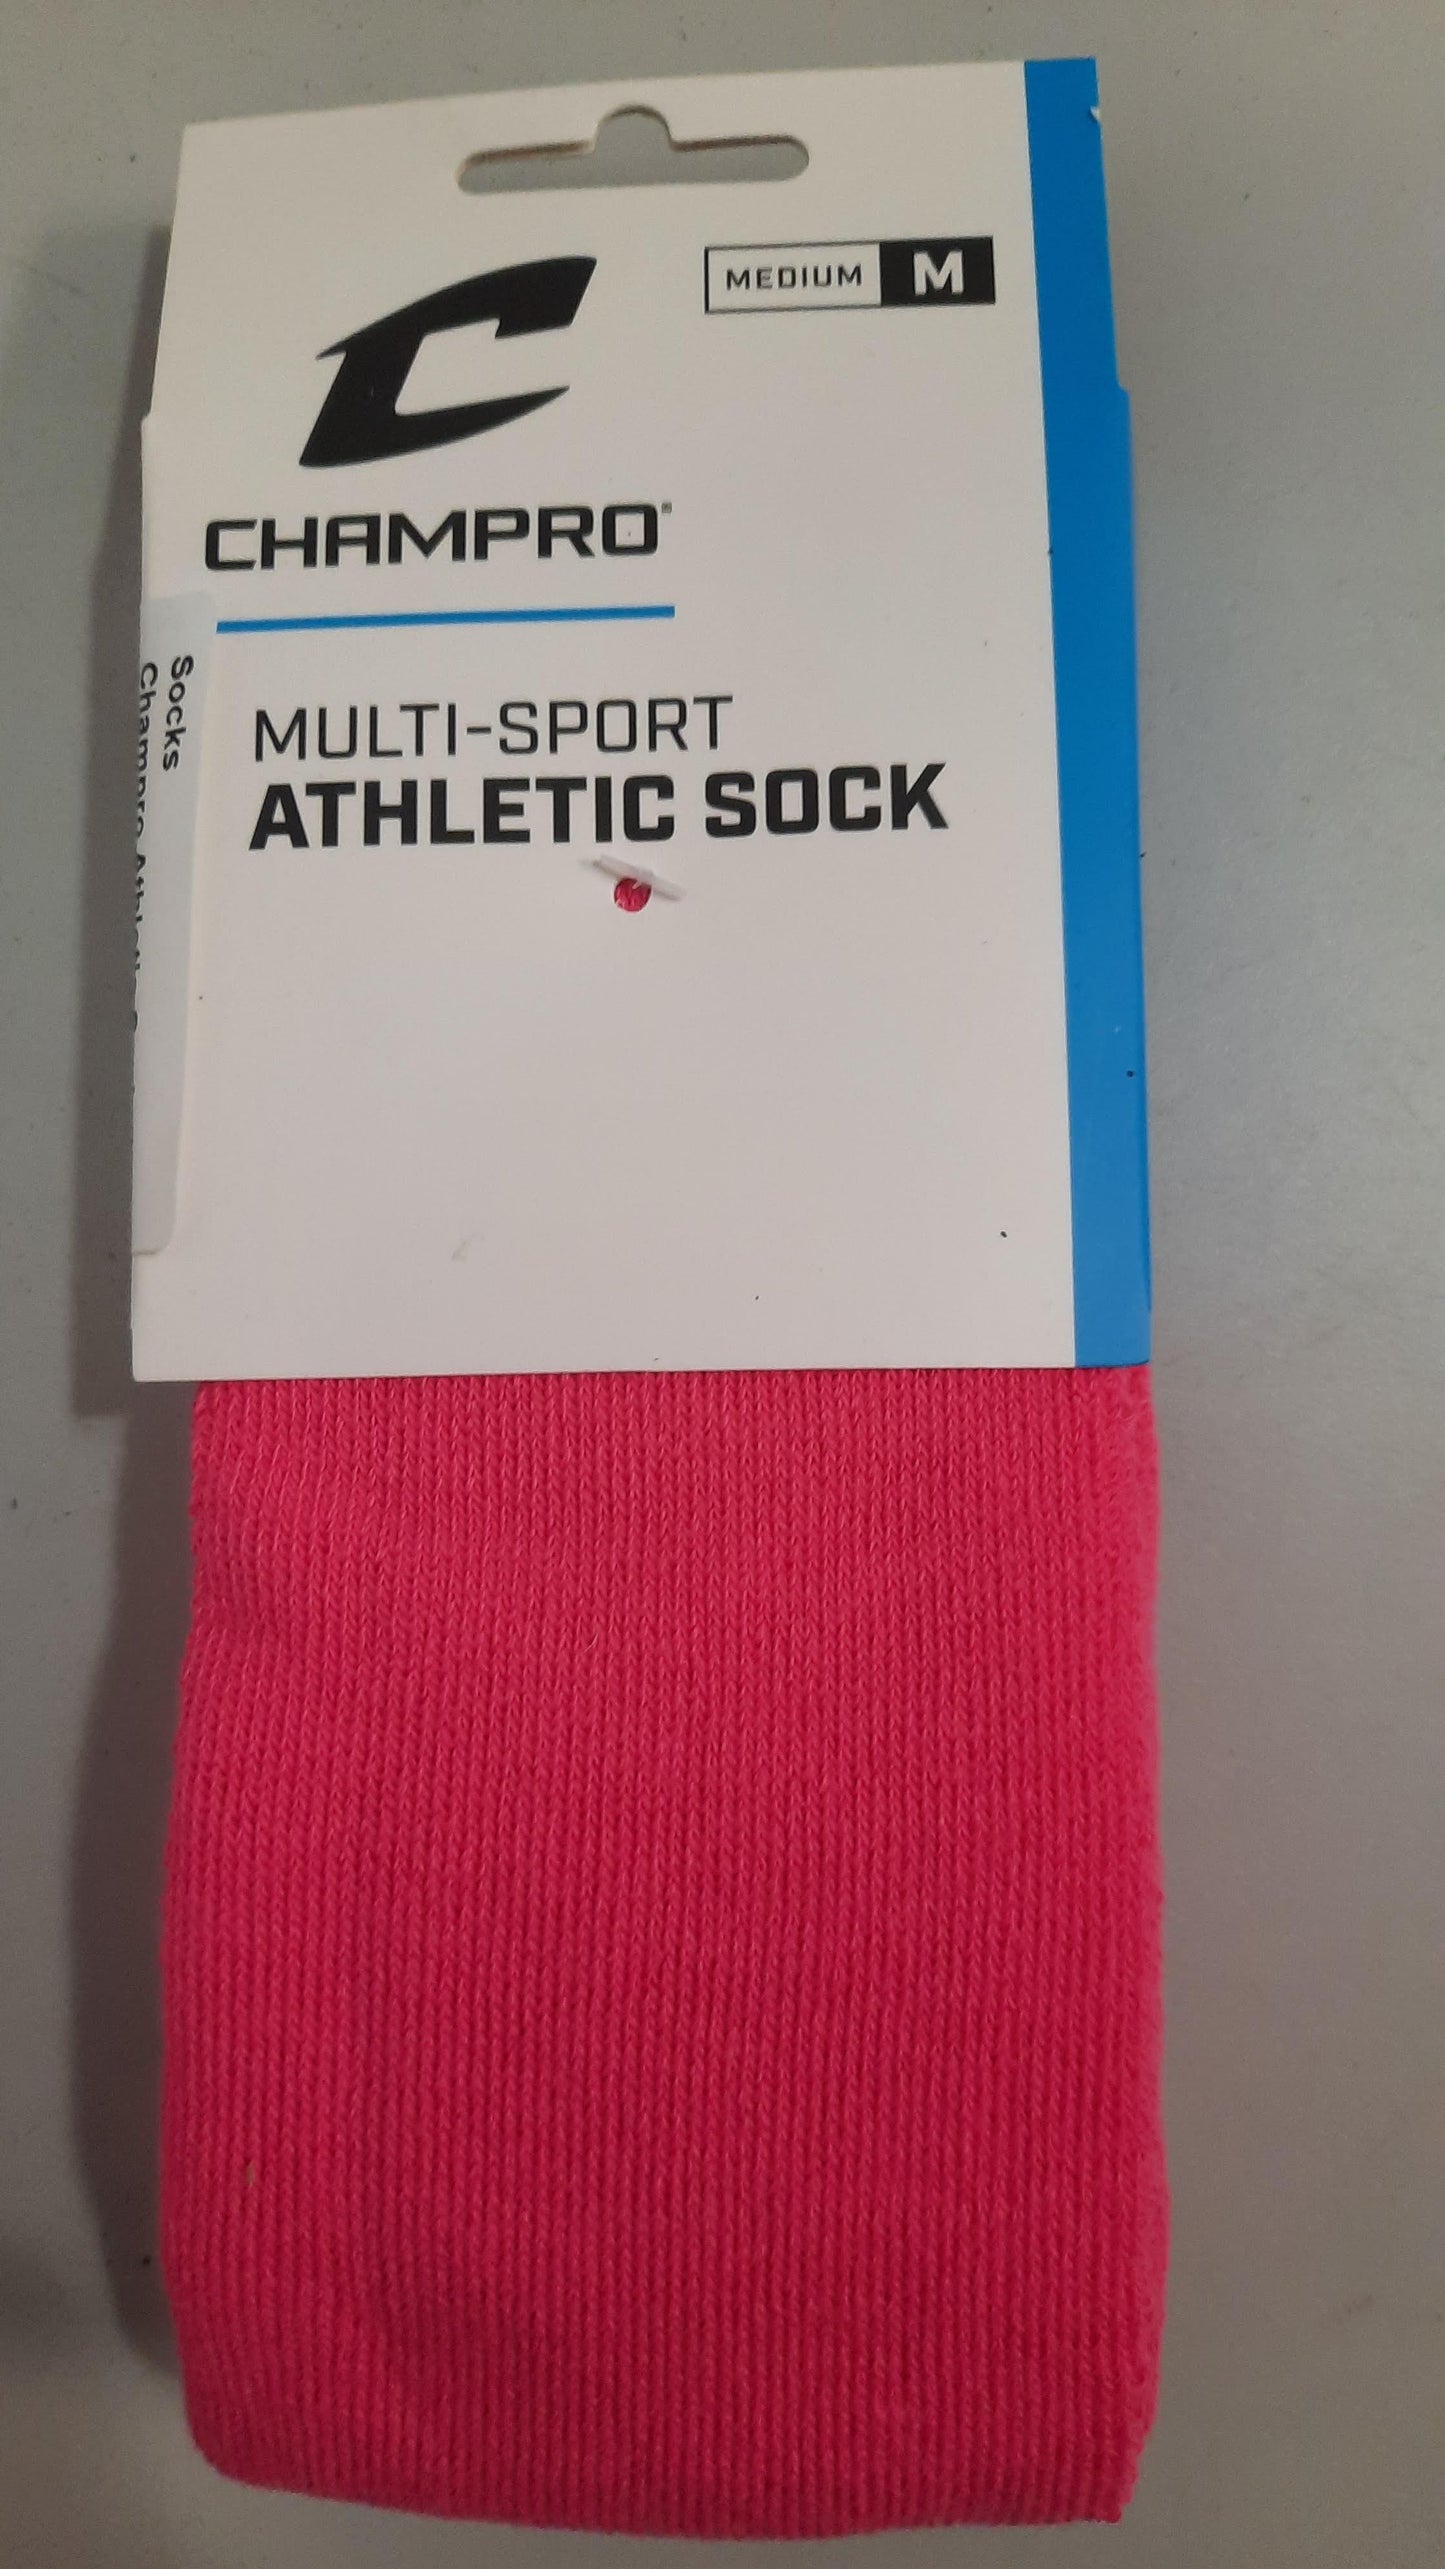 Champro Athletic Socks Size Medium Color Pink Multi-Sport Condition New